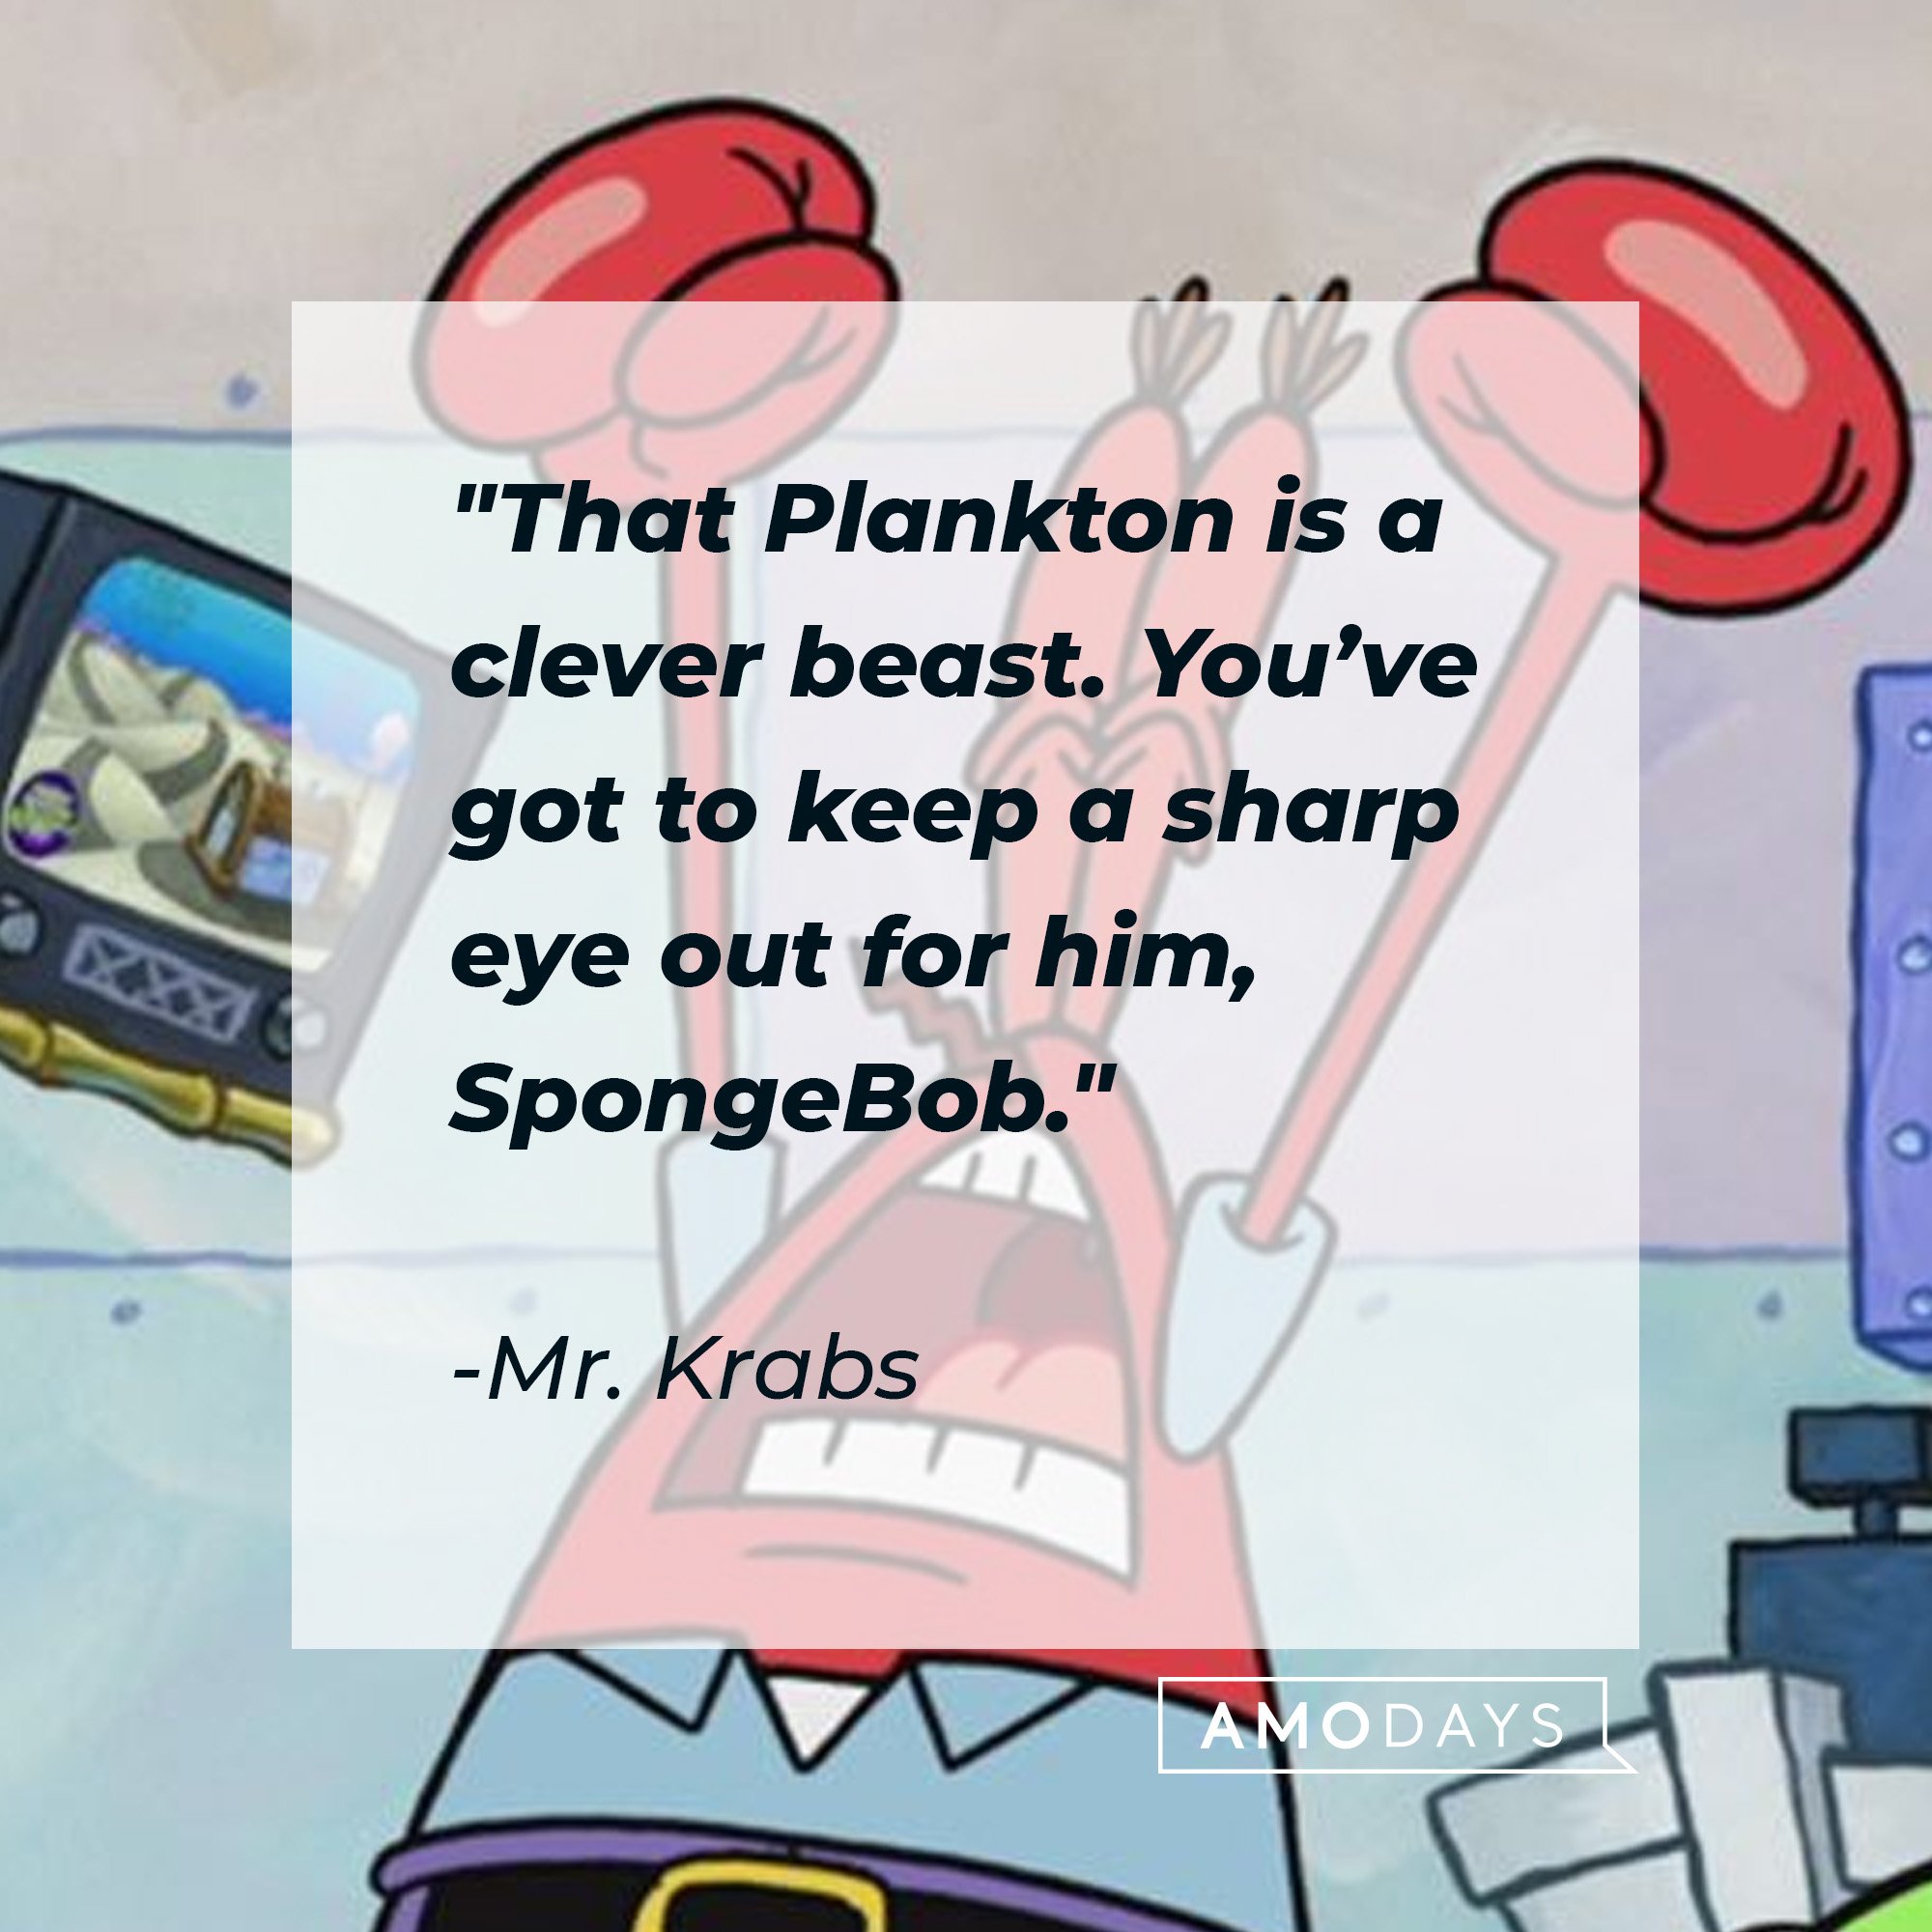 Mr. Krabs's quote: "That Plankton is a clever beast. You’ve got to keep a sharp eye out for him, SpongeBob." | Image: AmoDays 